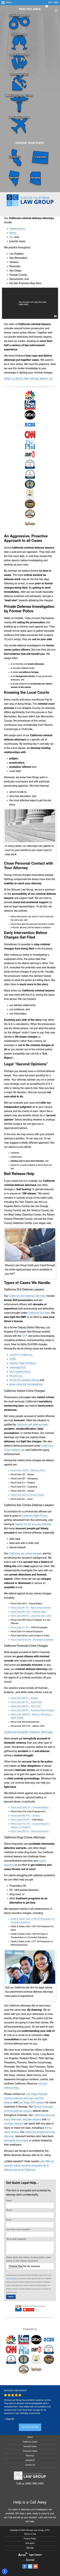 Shouse Law Group - Van Nuys CA Lawyers